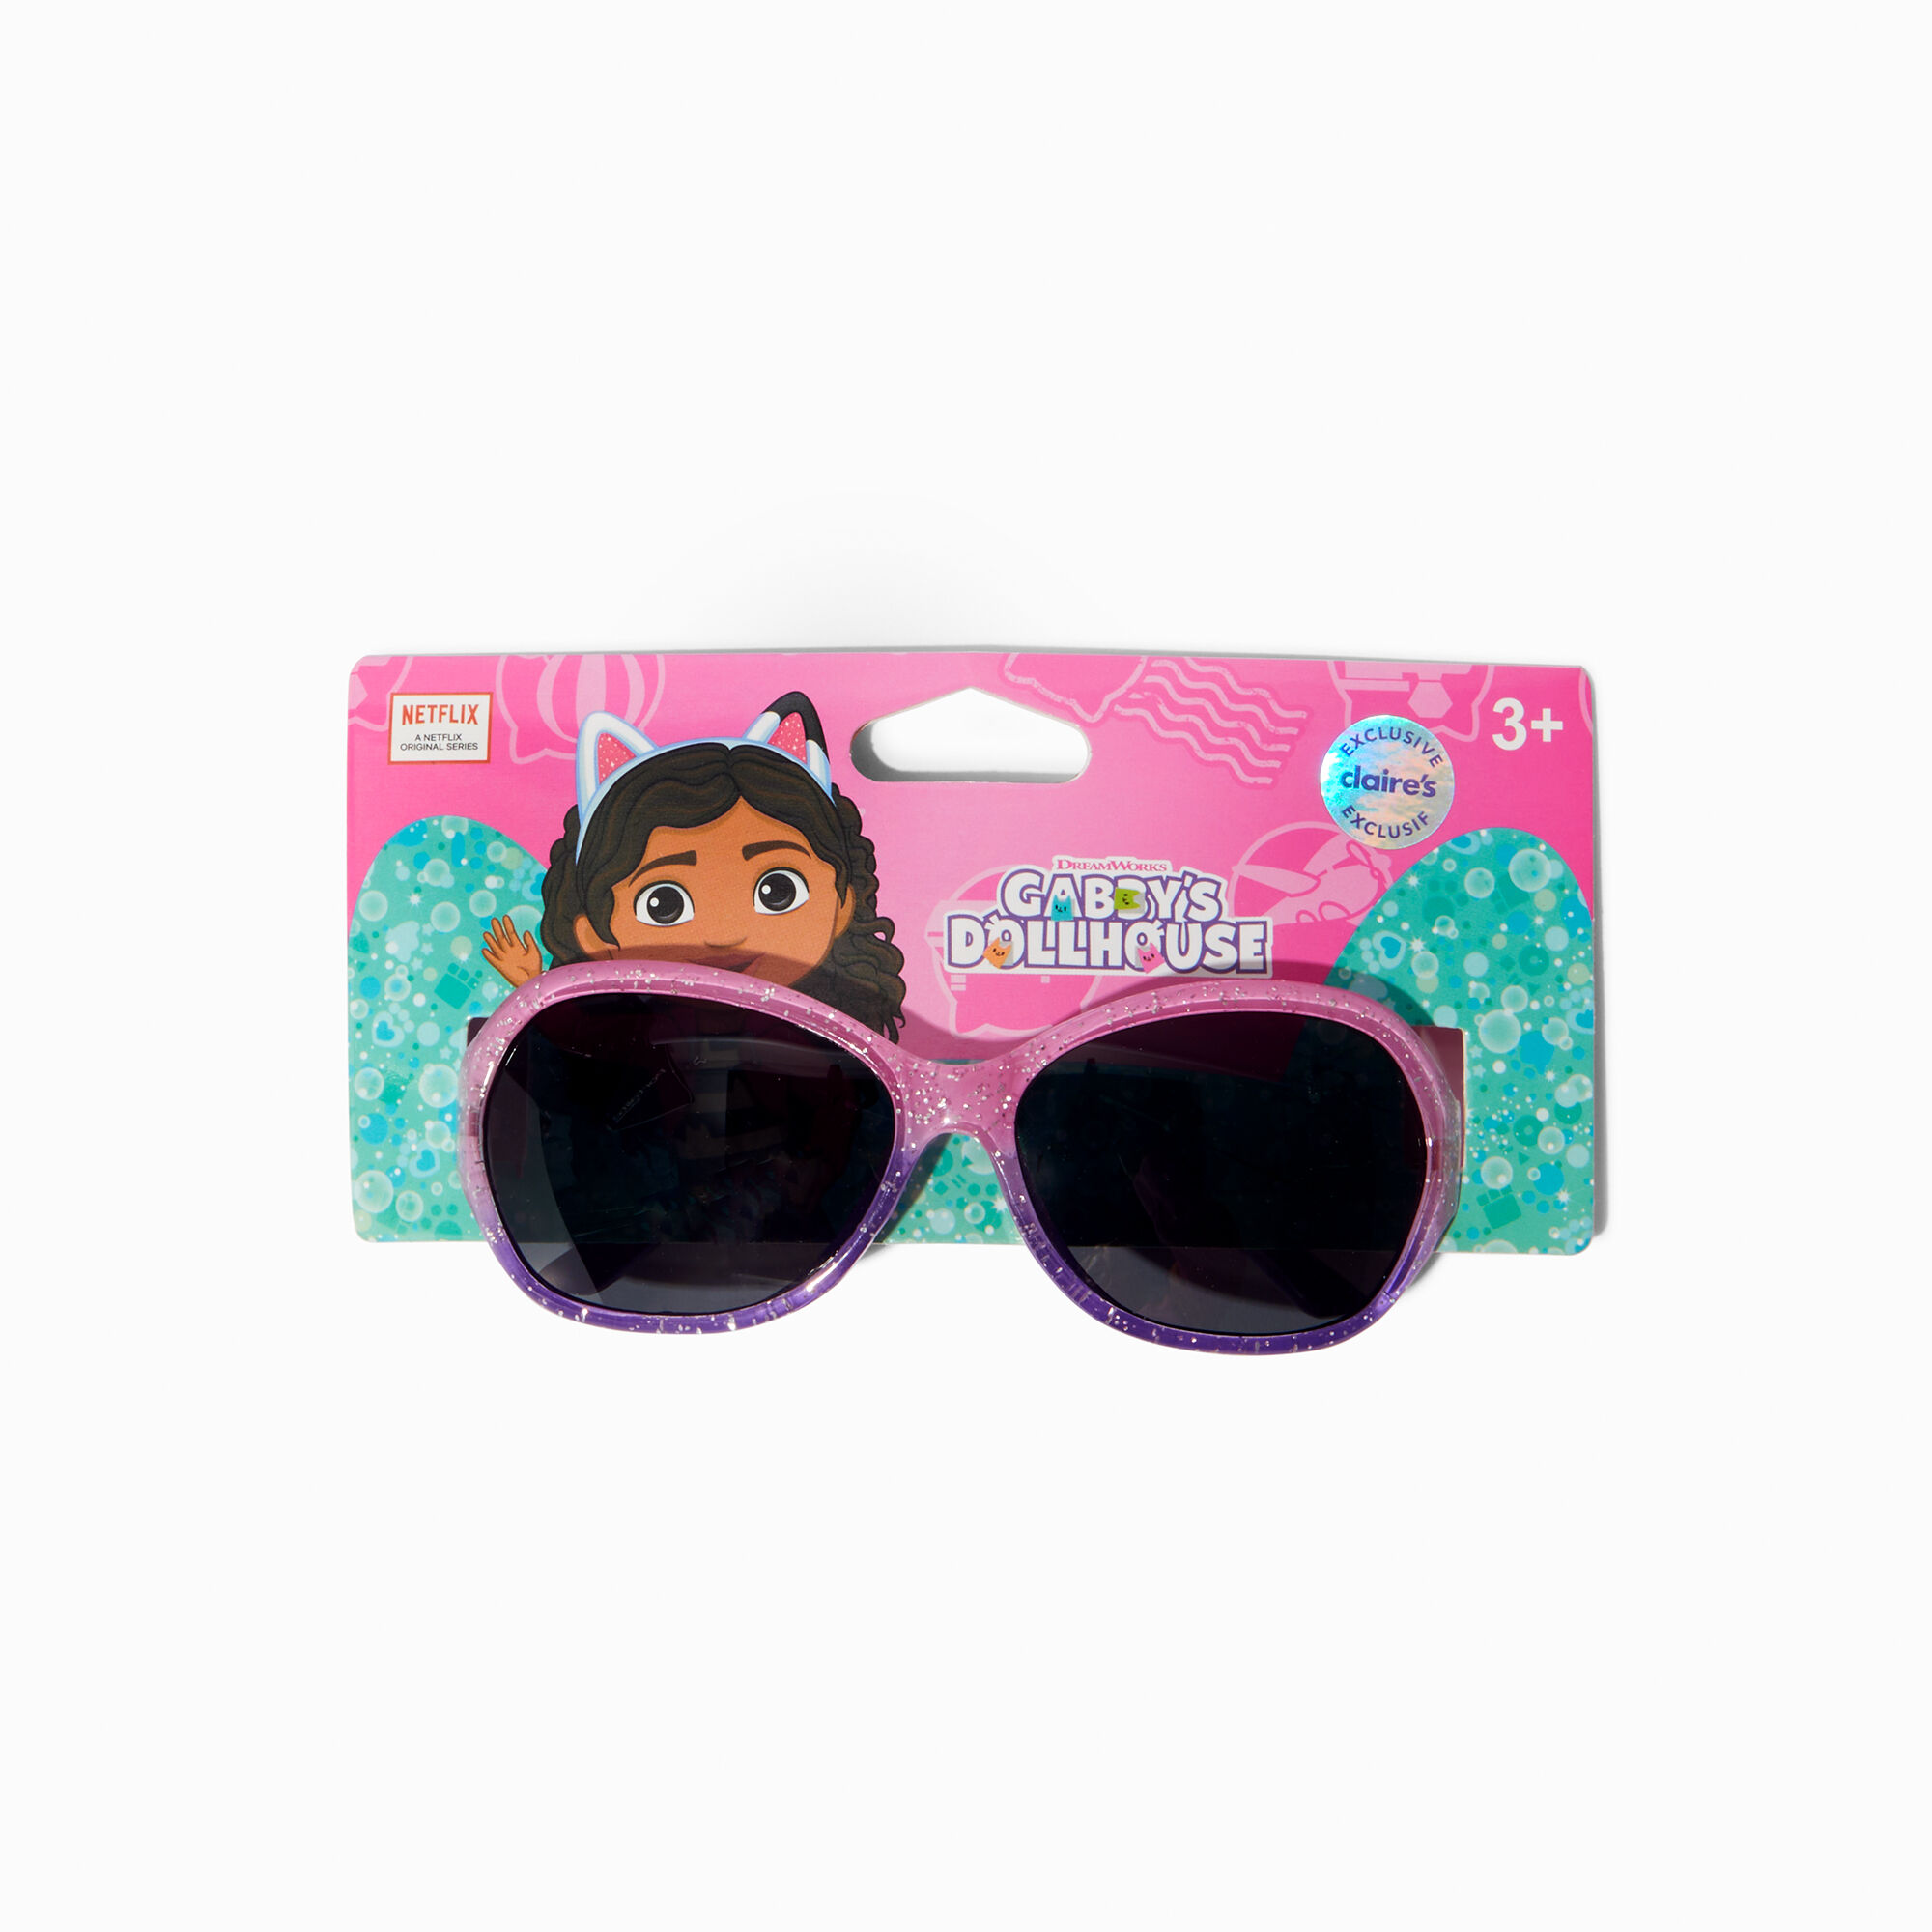 View Gabbys Dollhouse Claires Exclusive Sunglasses Pink information